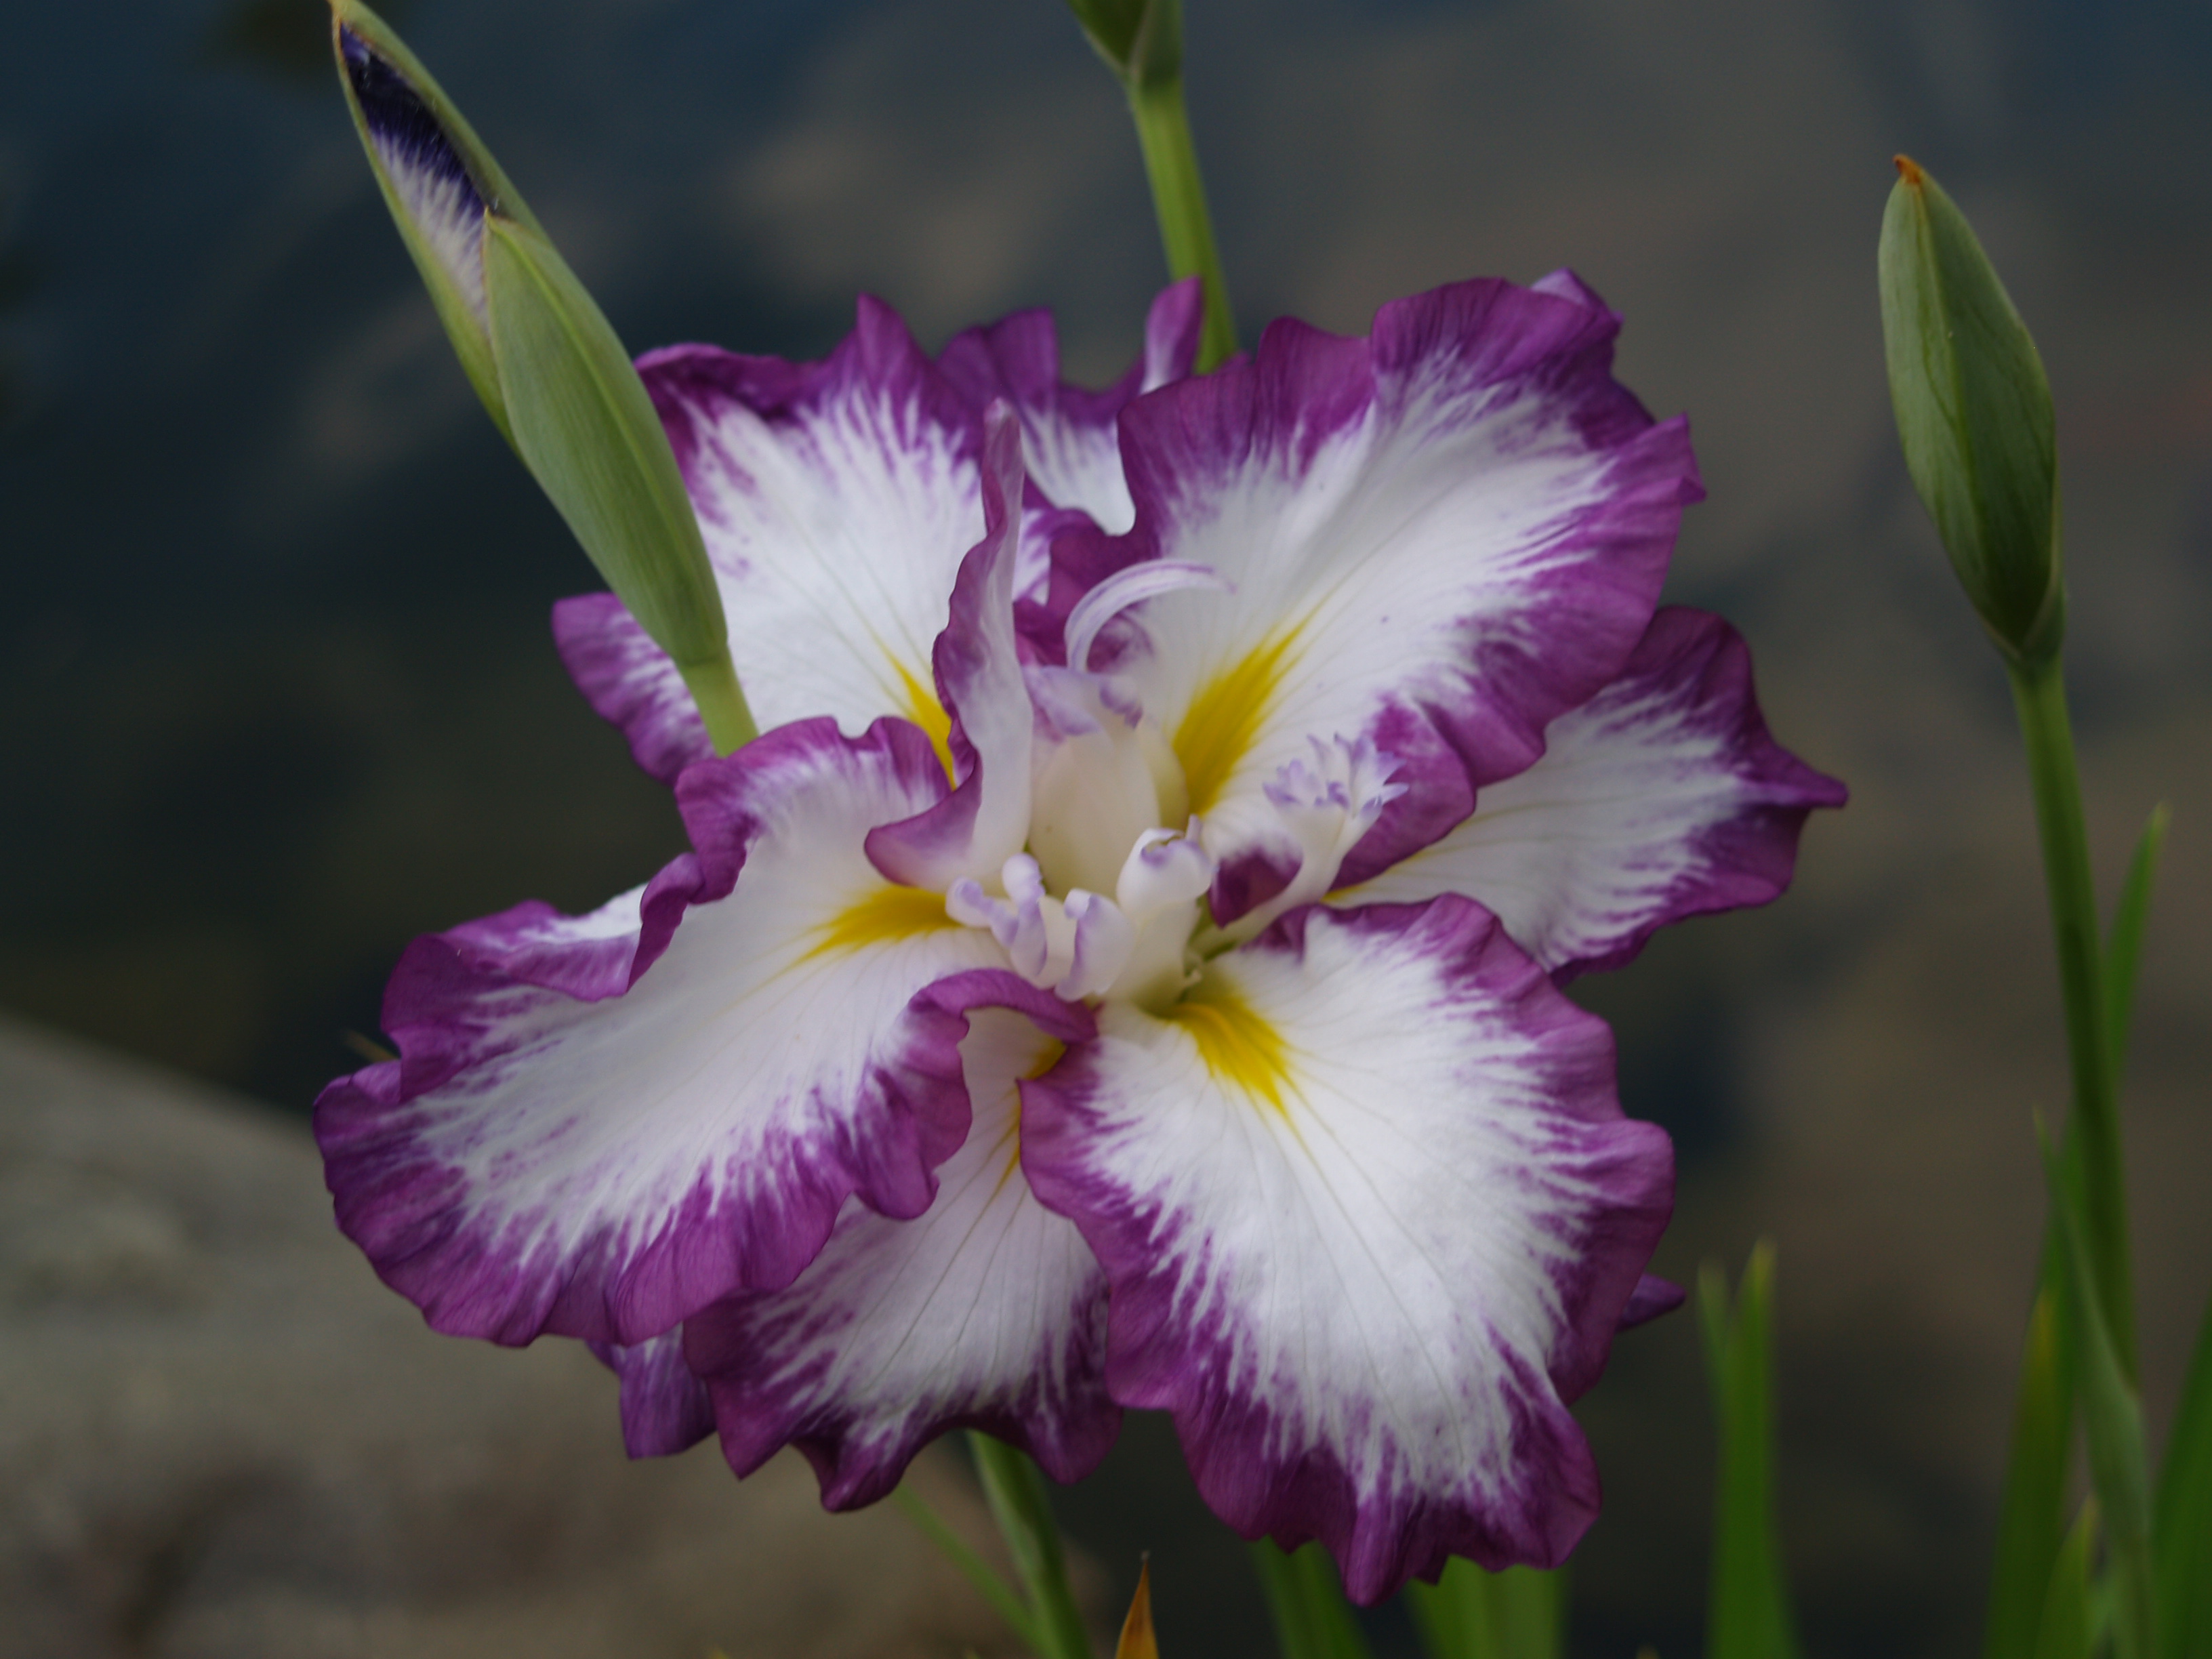 How do you prune iris flowers after they have bloomed?